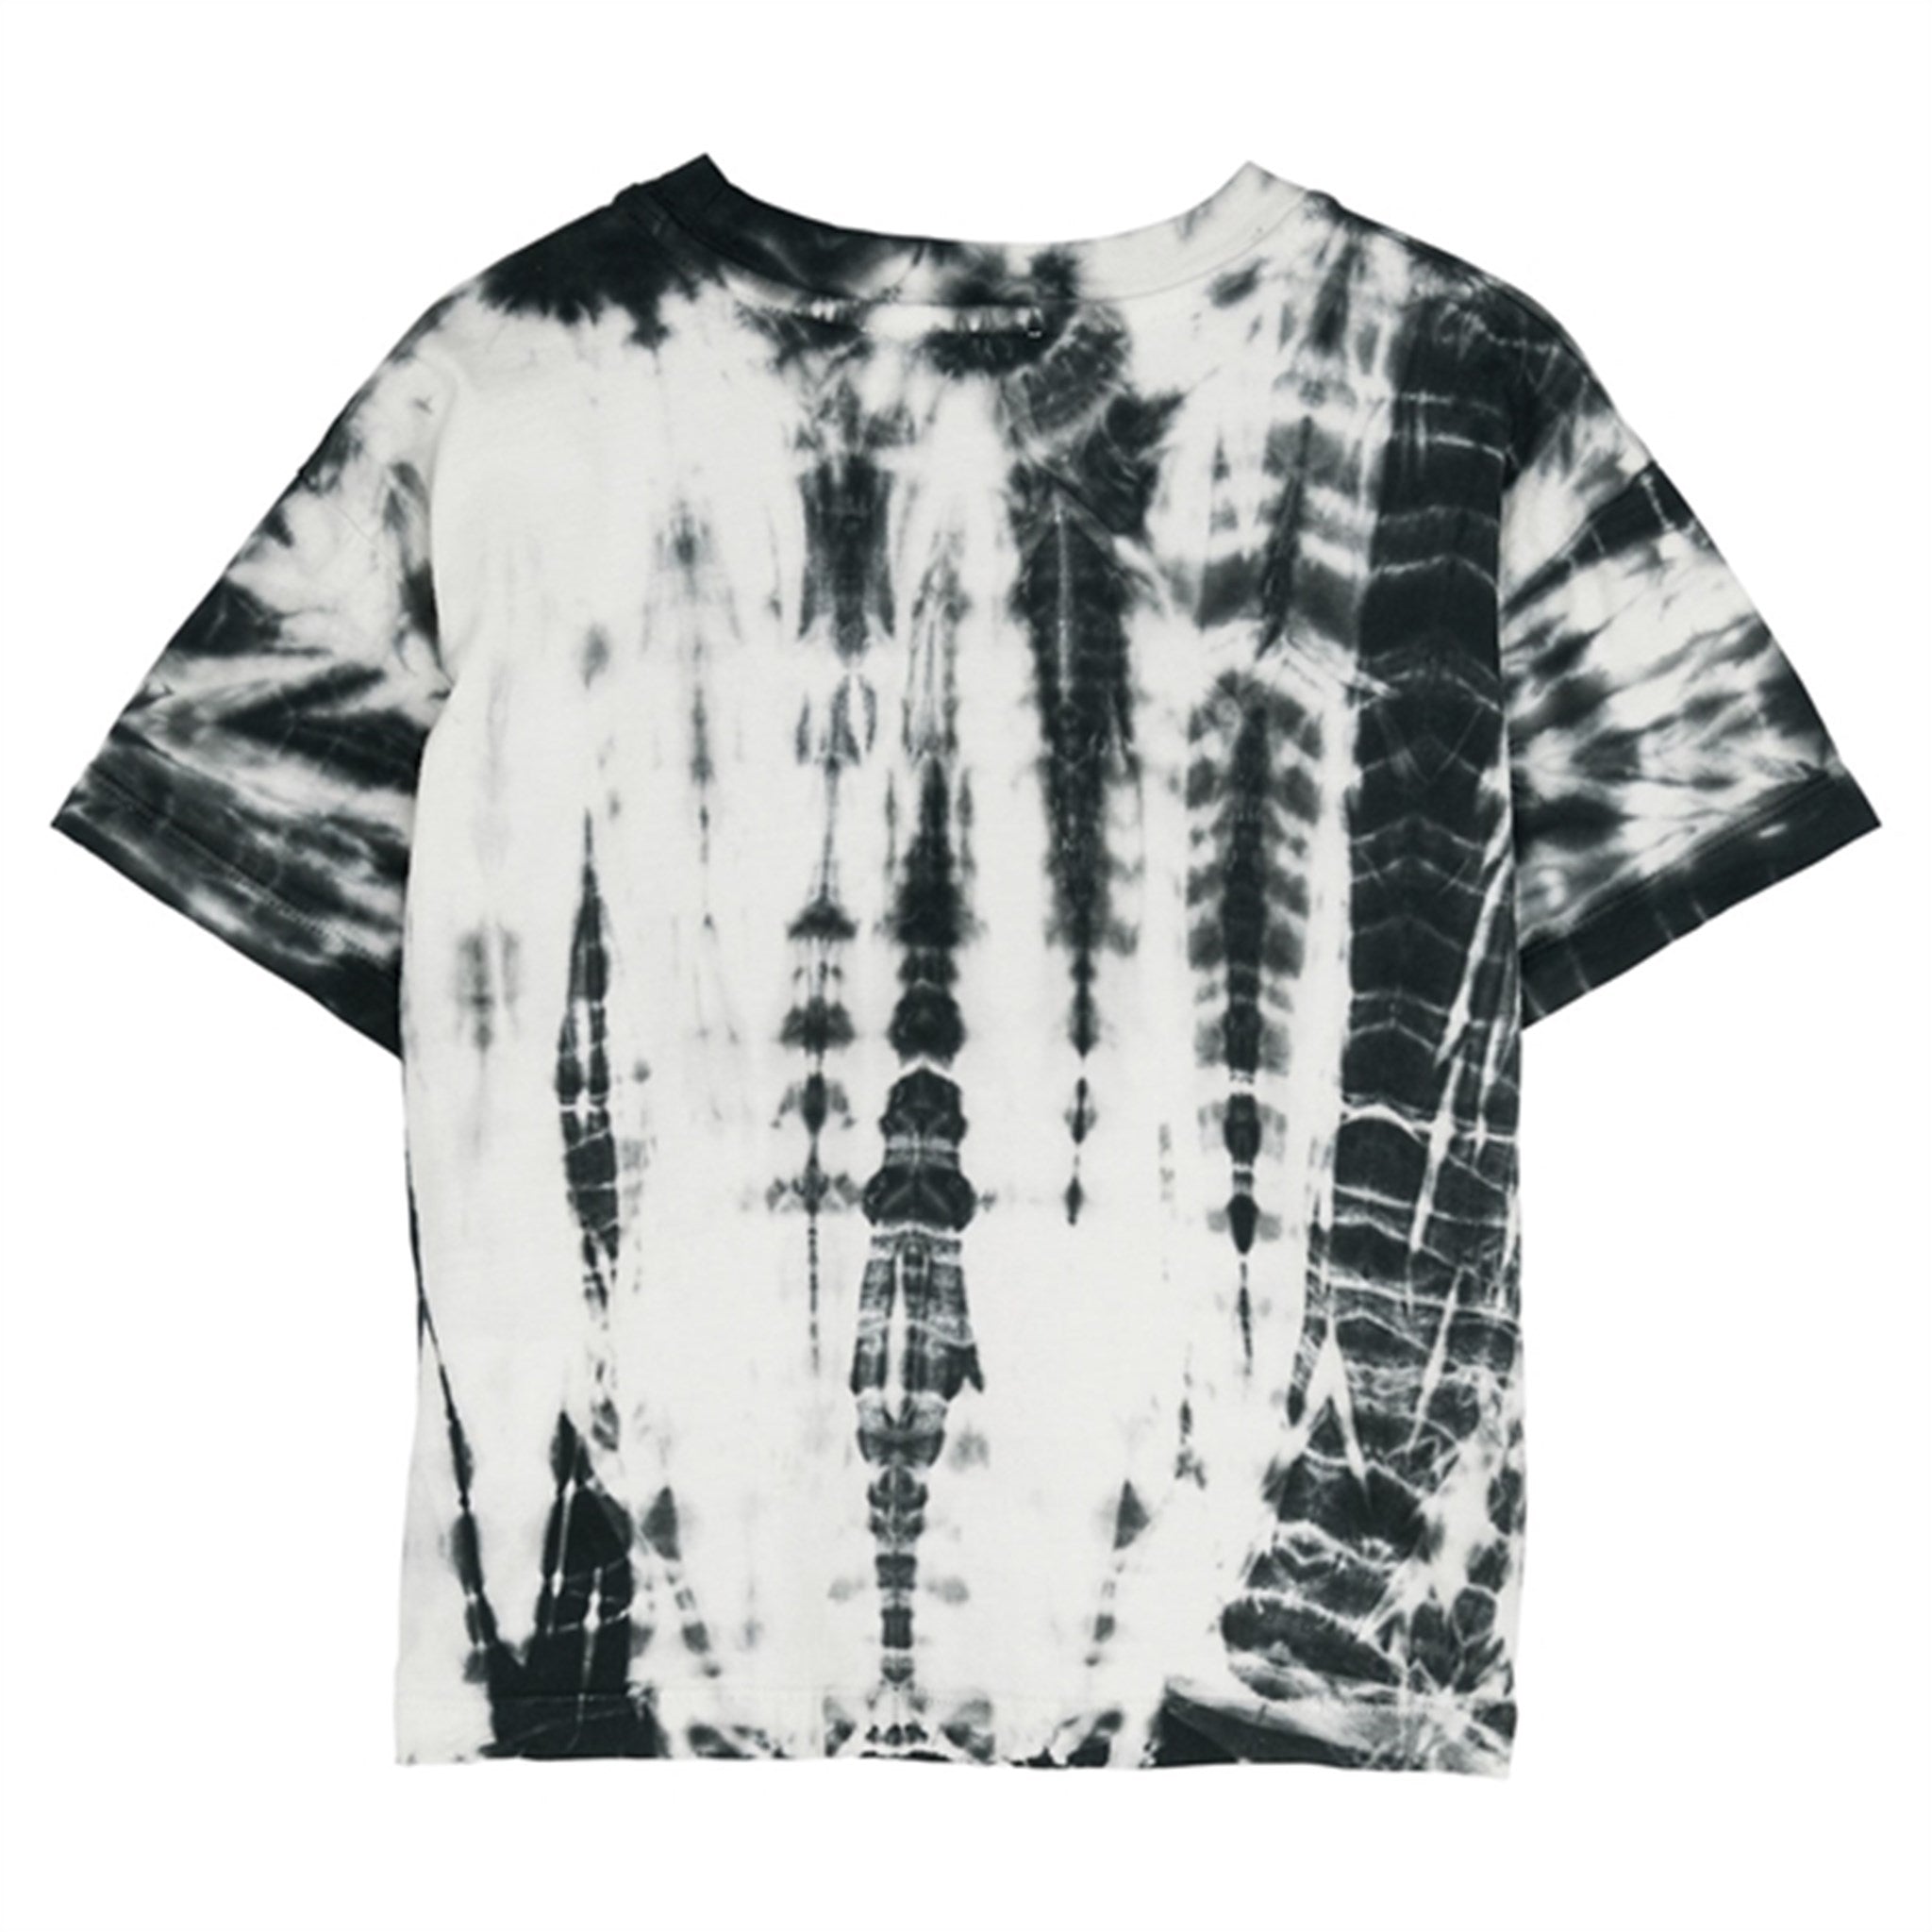 Finger In The Nose Queen Off White Tie & Dye T-shirt 3